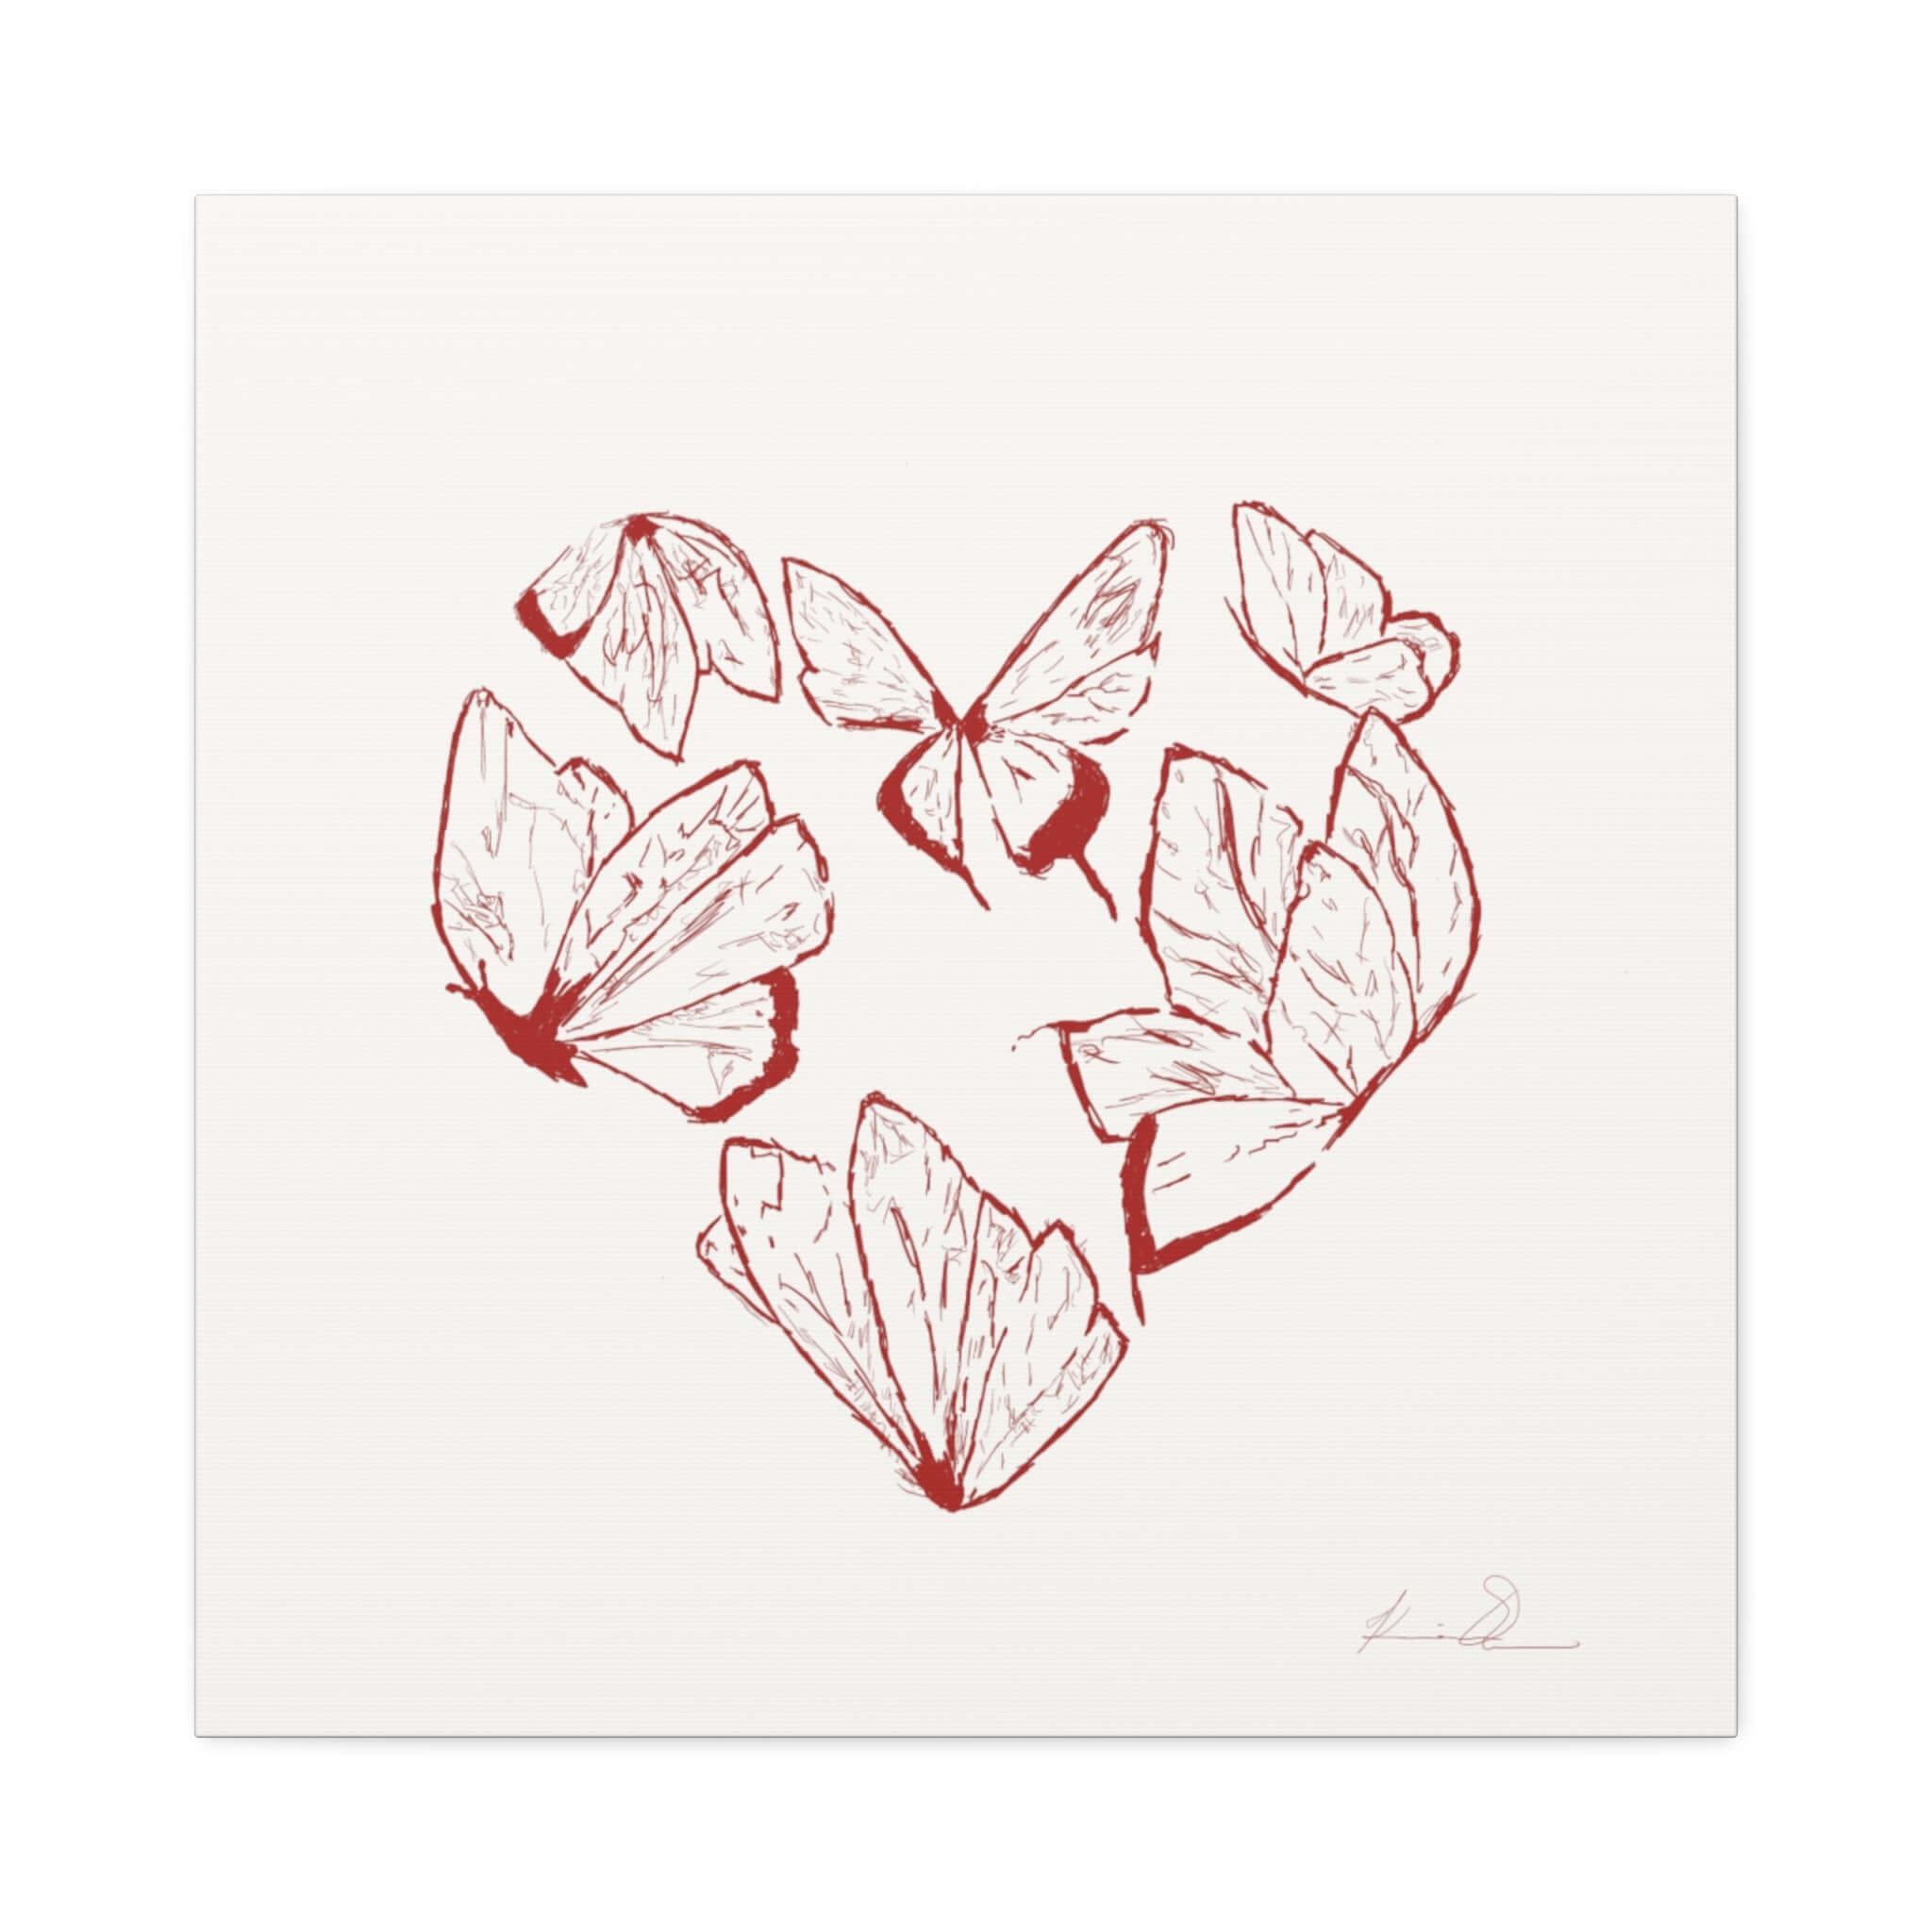 Heart-shaped butterfly artwork on white canvas, "First Site" print, showcasing love and creativity in red detailed art